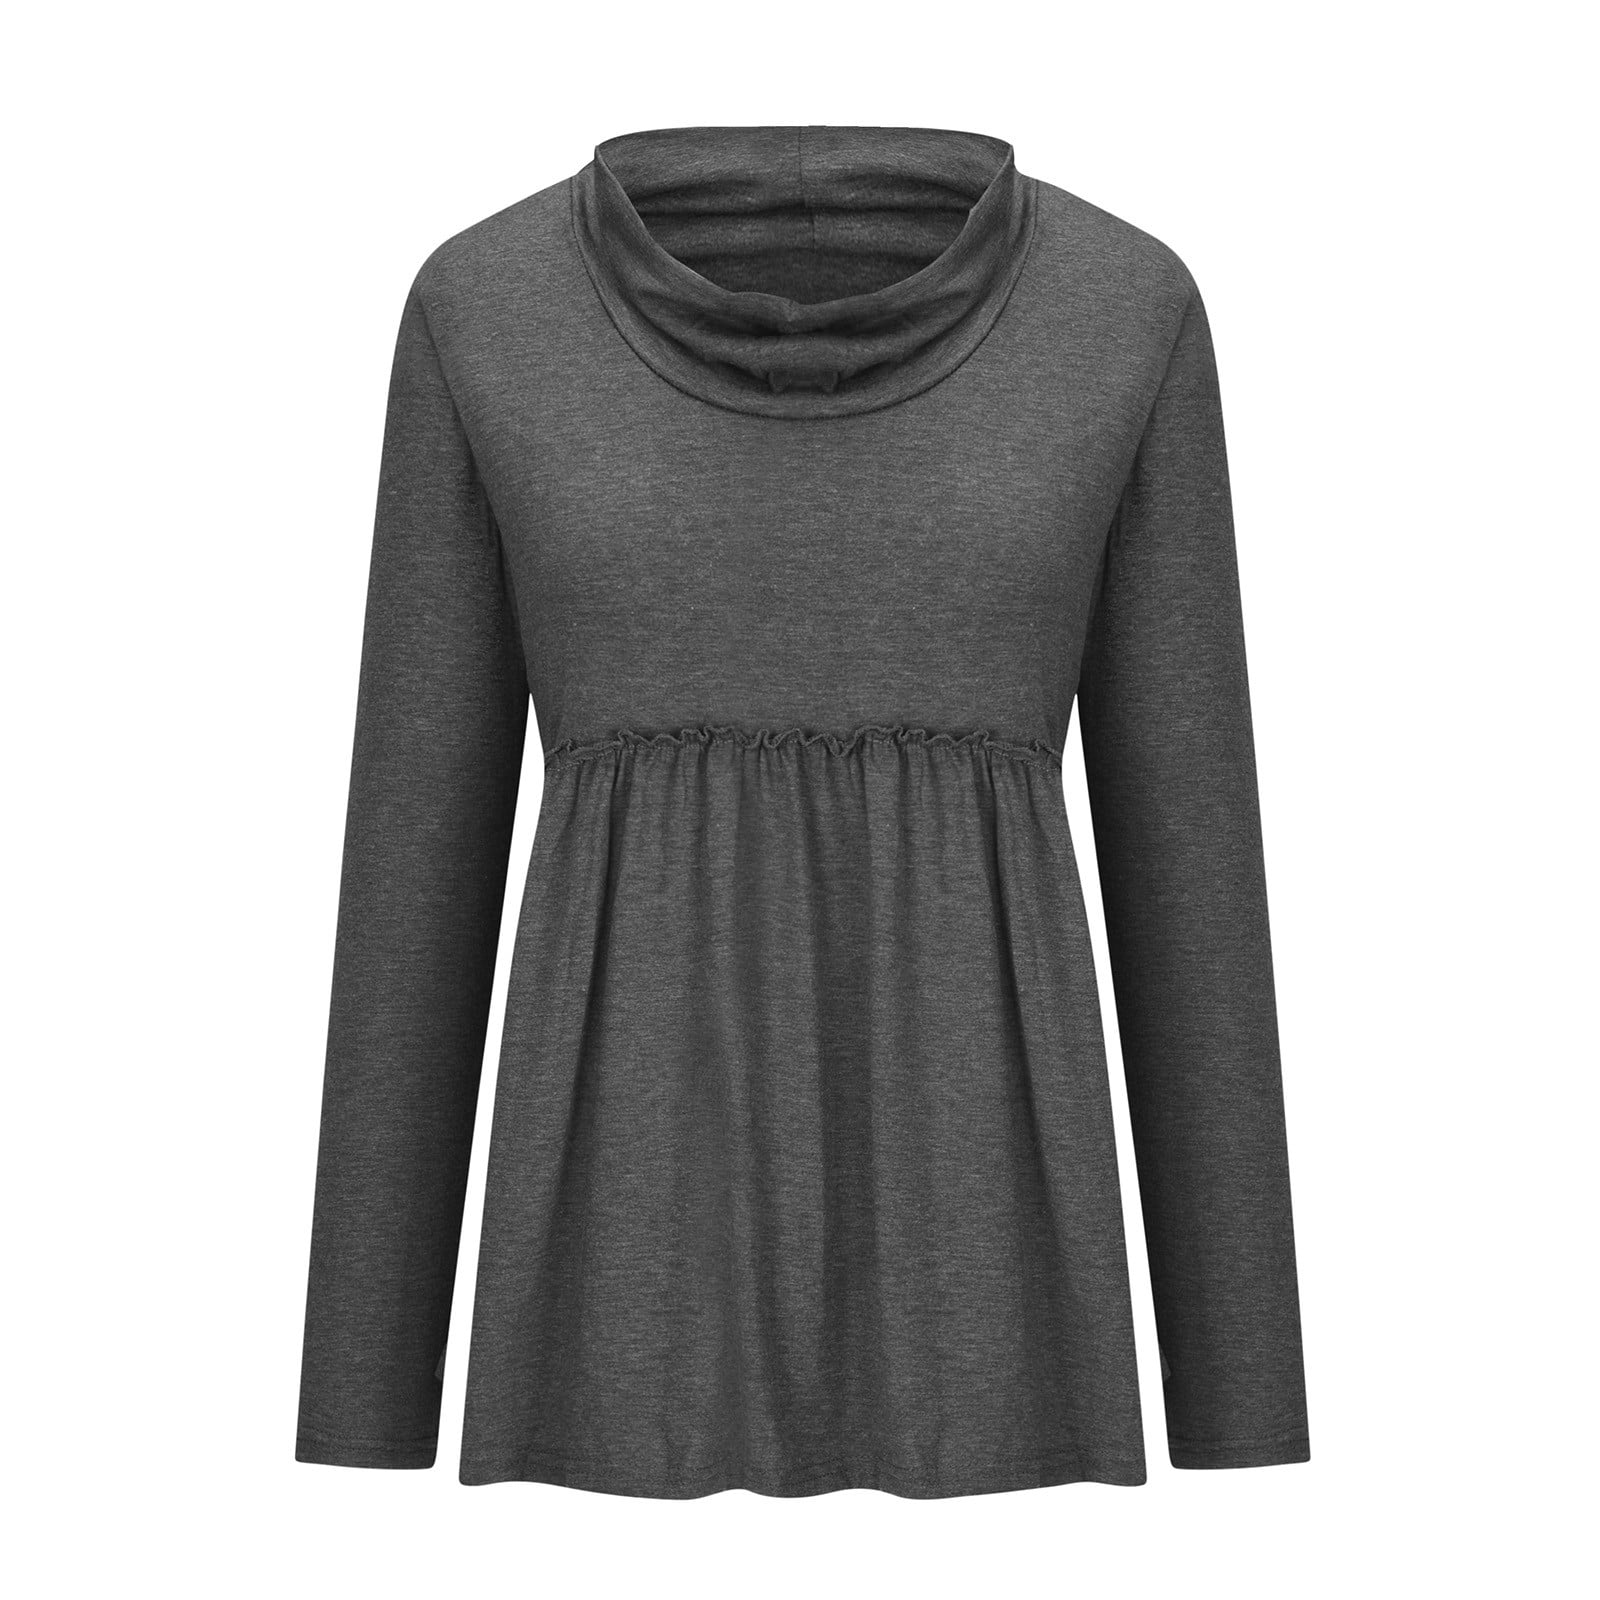 Women's Clothing Long Sleeve Round,Returns Liquidation pallets,Women Shirts  on Clearance, Womens oct 11 and 12,Labour Day Sale,Preppy Stuff Under 5  Dollars Dark Gray at  Women's Clothing store